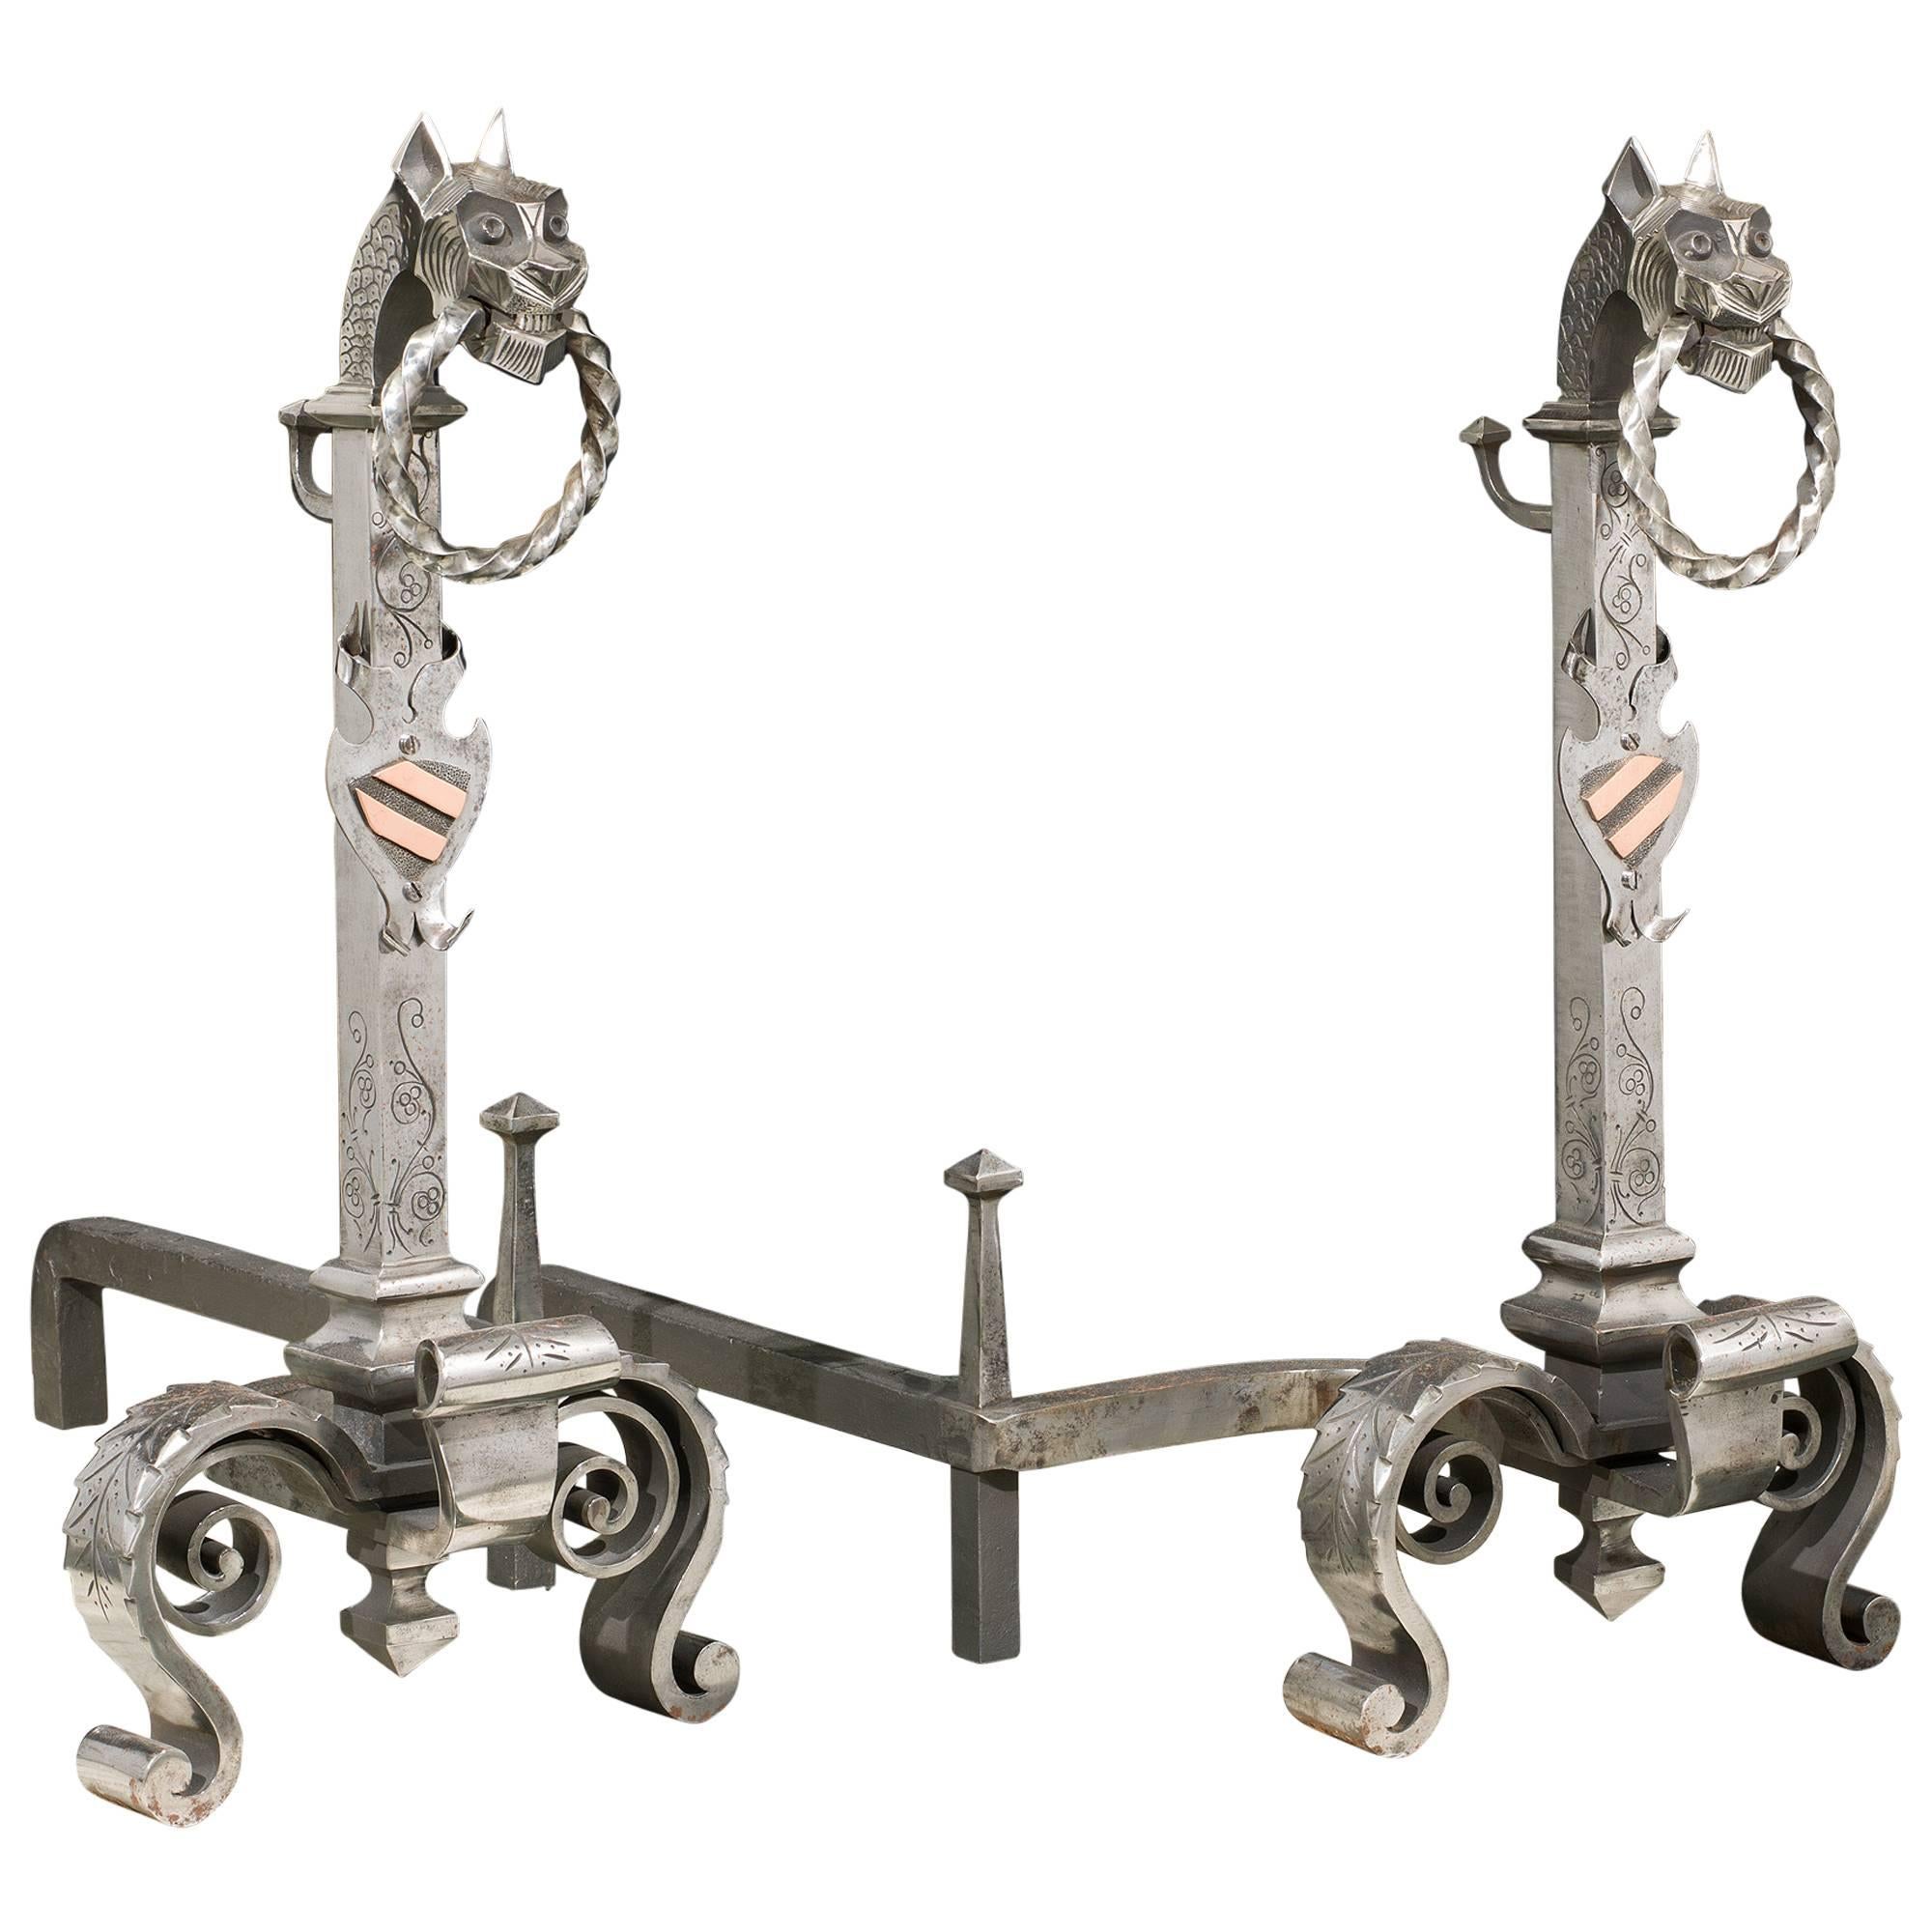 Pair of Tall English Gothic Style Wrought Iron Antique Andirons